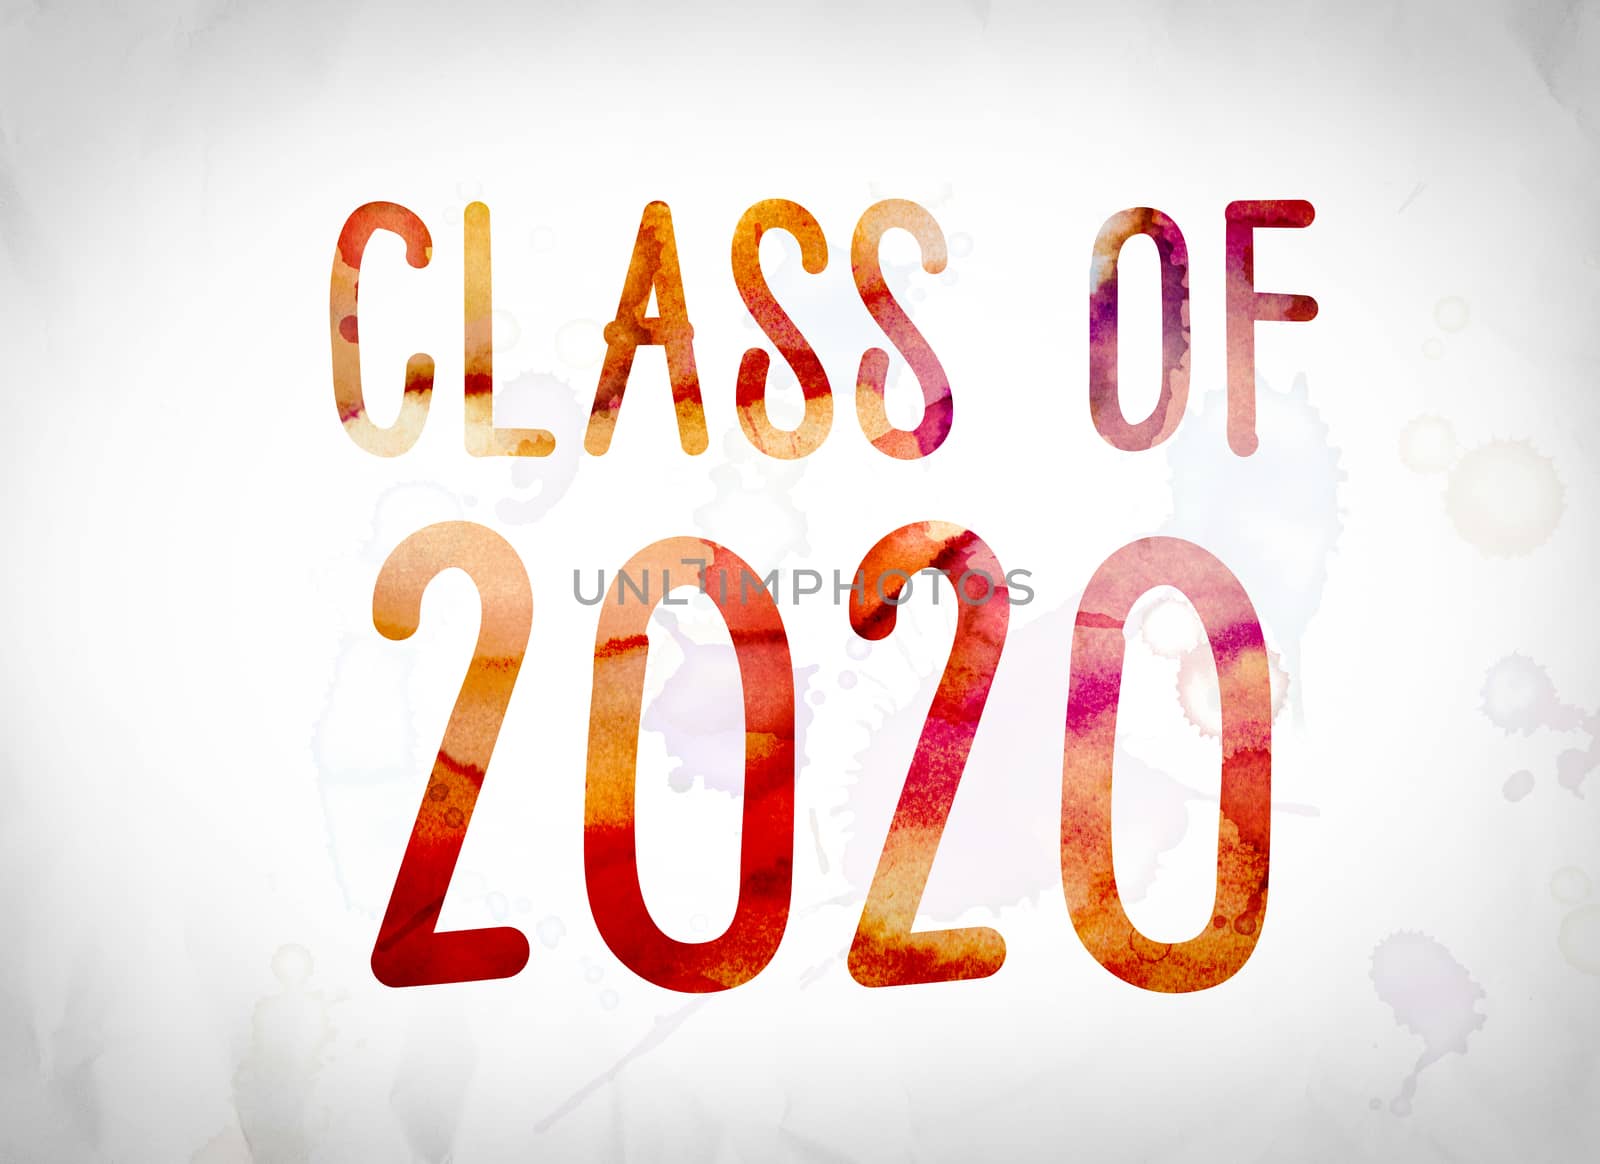 The word "Class of 2020" written in watercolor washes over a white paper background concept and theme.